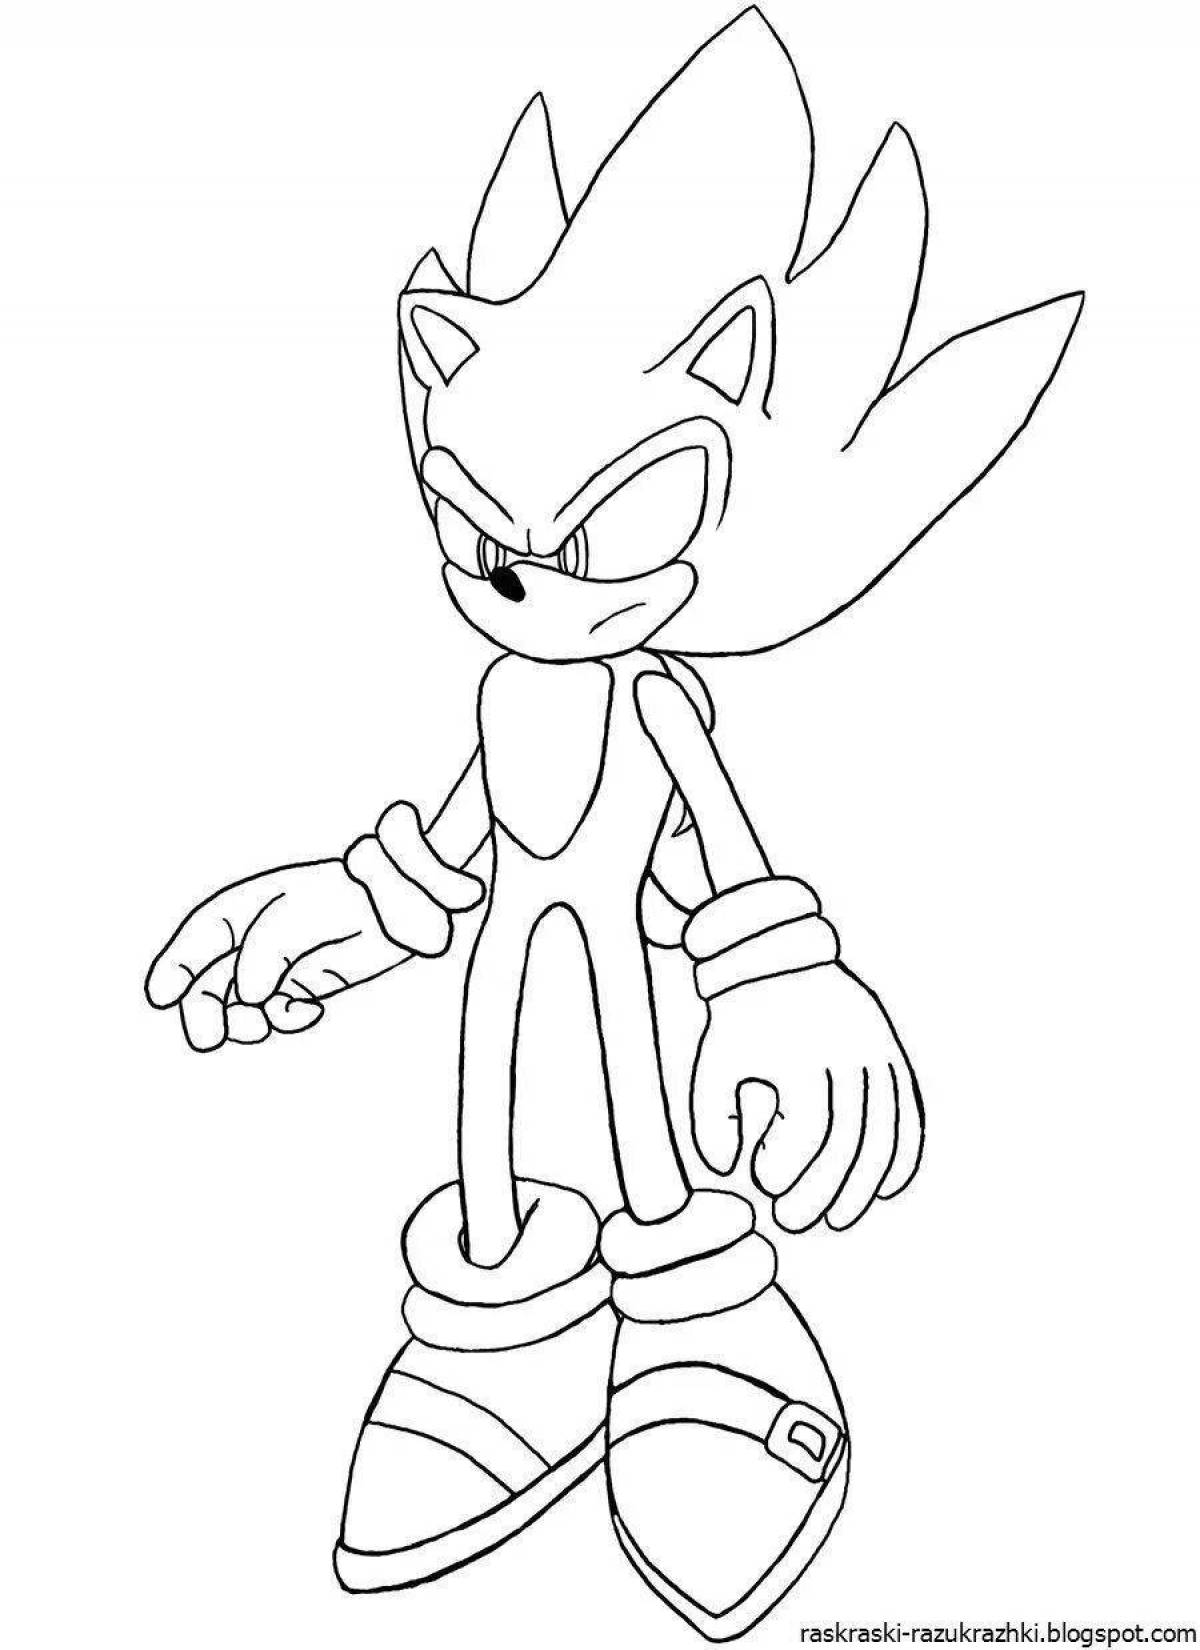 Exuberant darkspine sonic coloring page